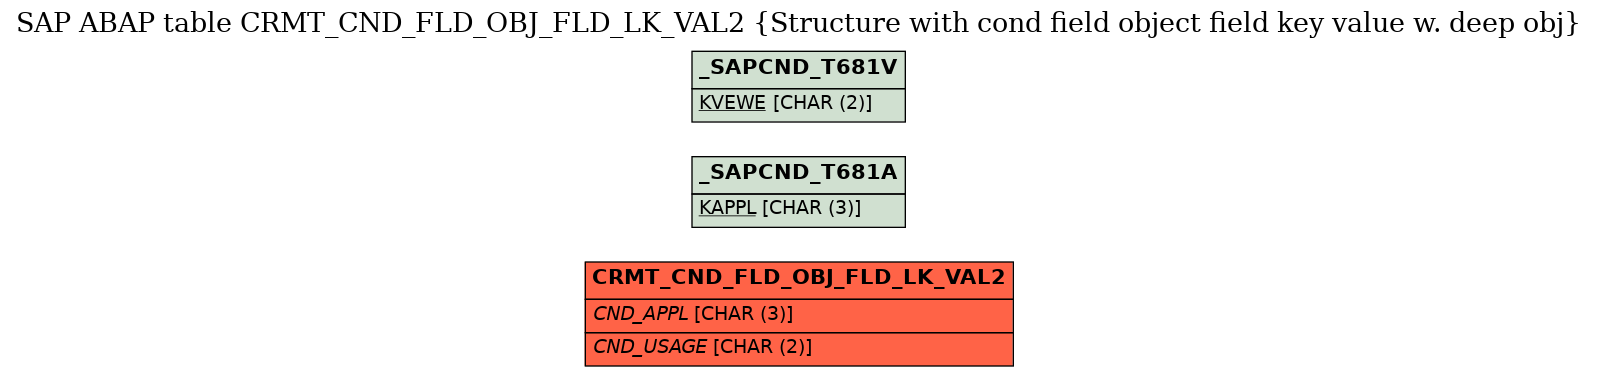 E-R Diagram for table CRMT_CND_FLD_OBJ_FLD_LK_VAL2 (Structure with cond field object field key value w. deep obj)